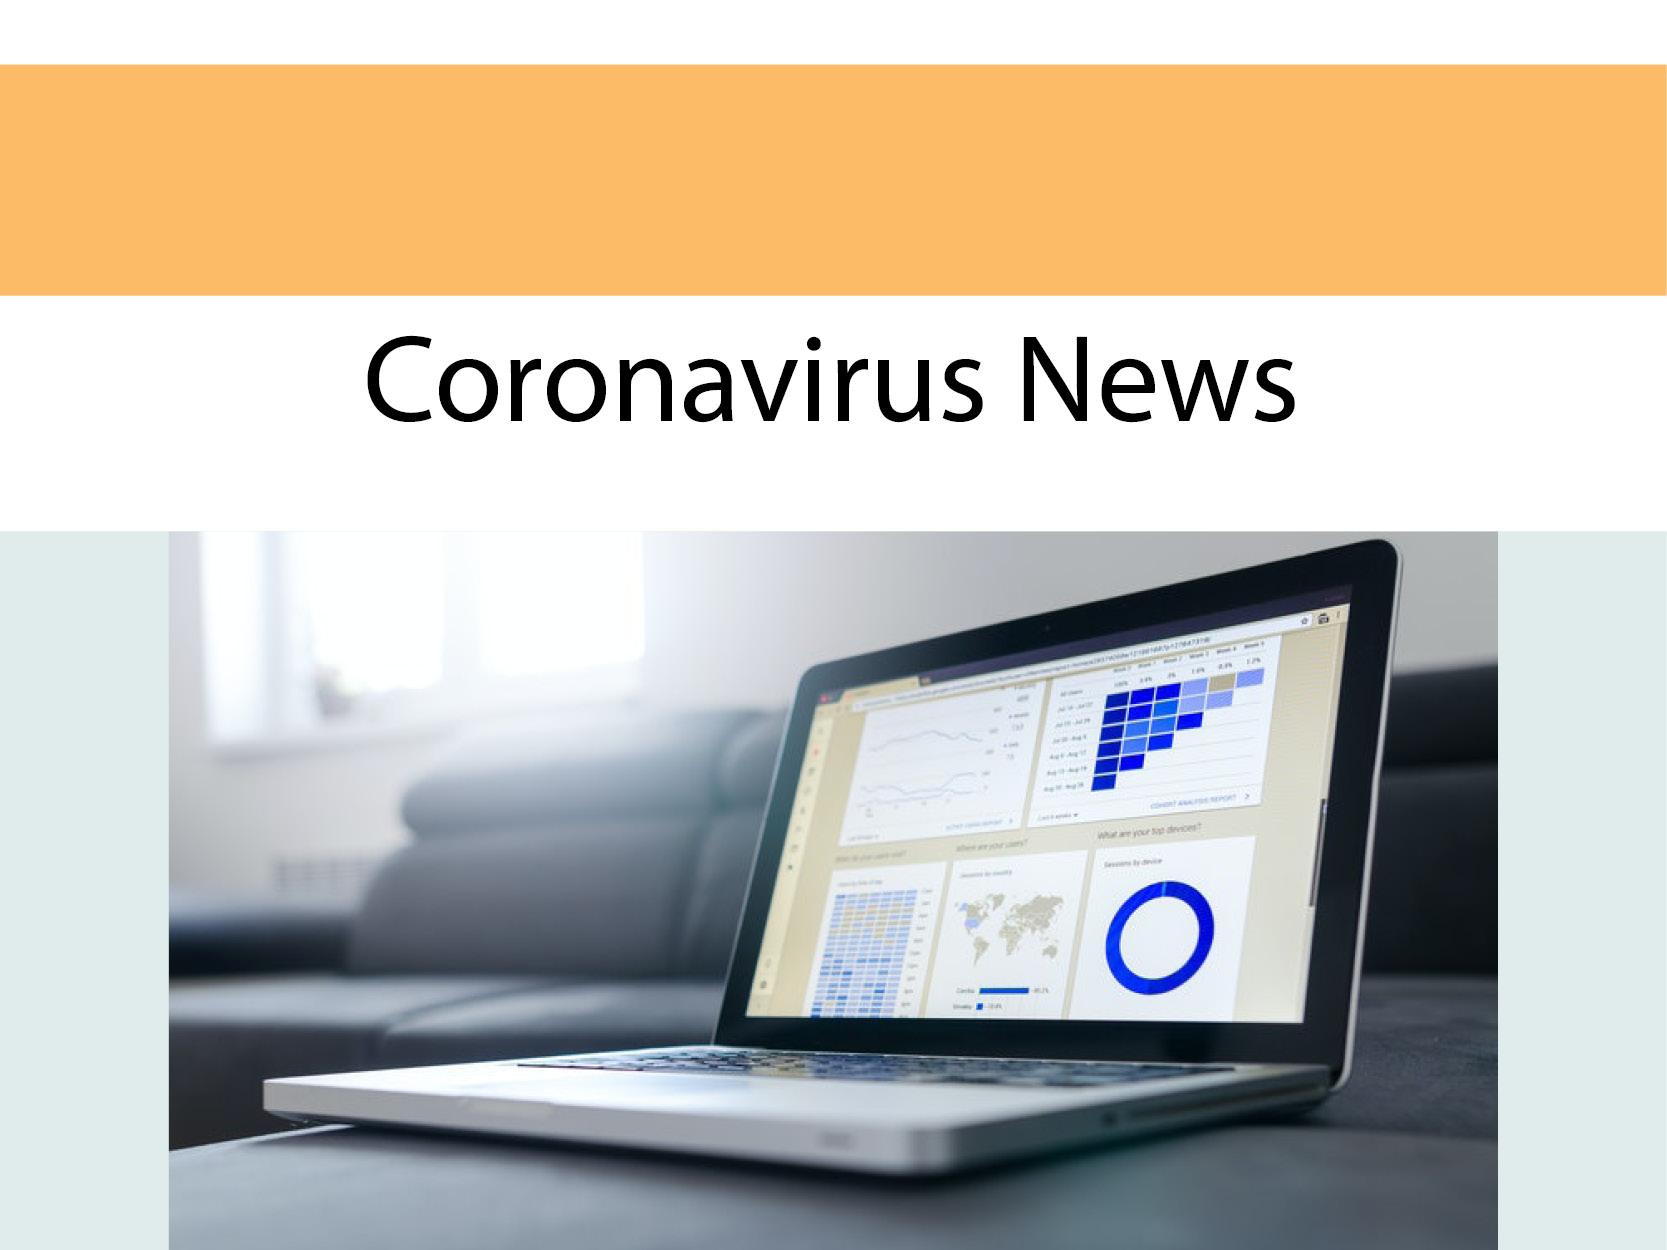 Active COVID-19 cases increase in Argenteuil, UK variant found in Québec